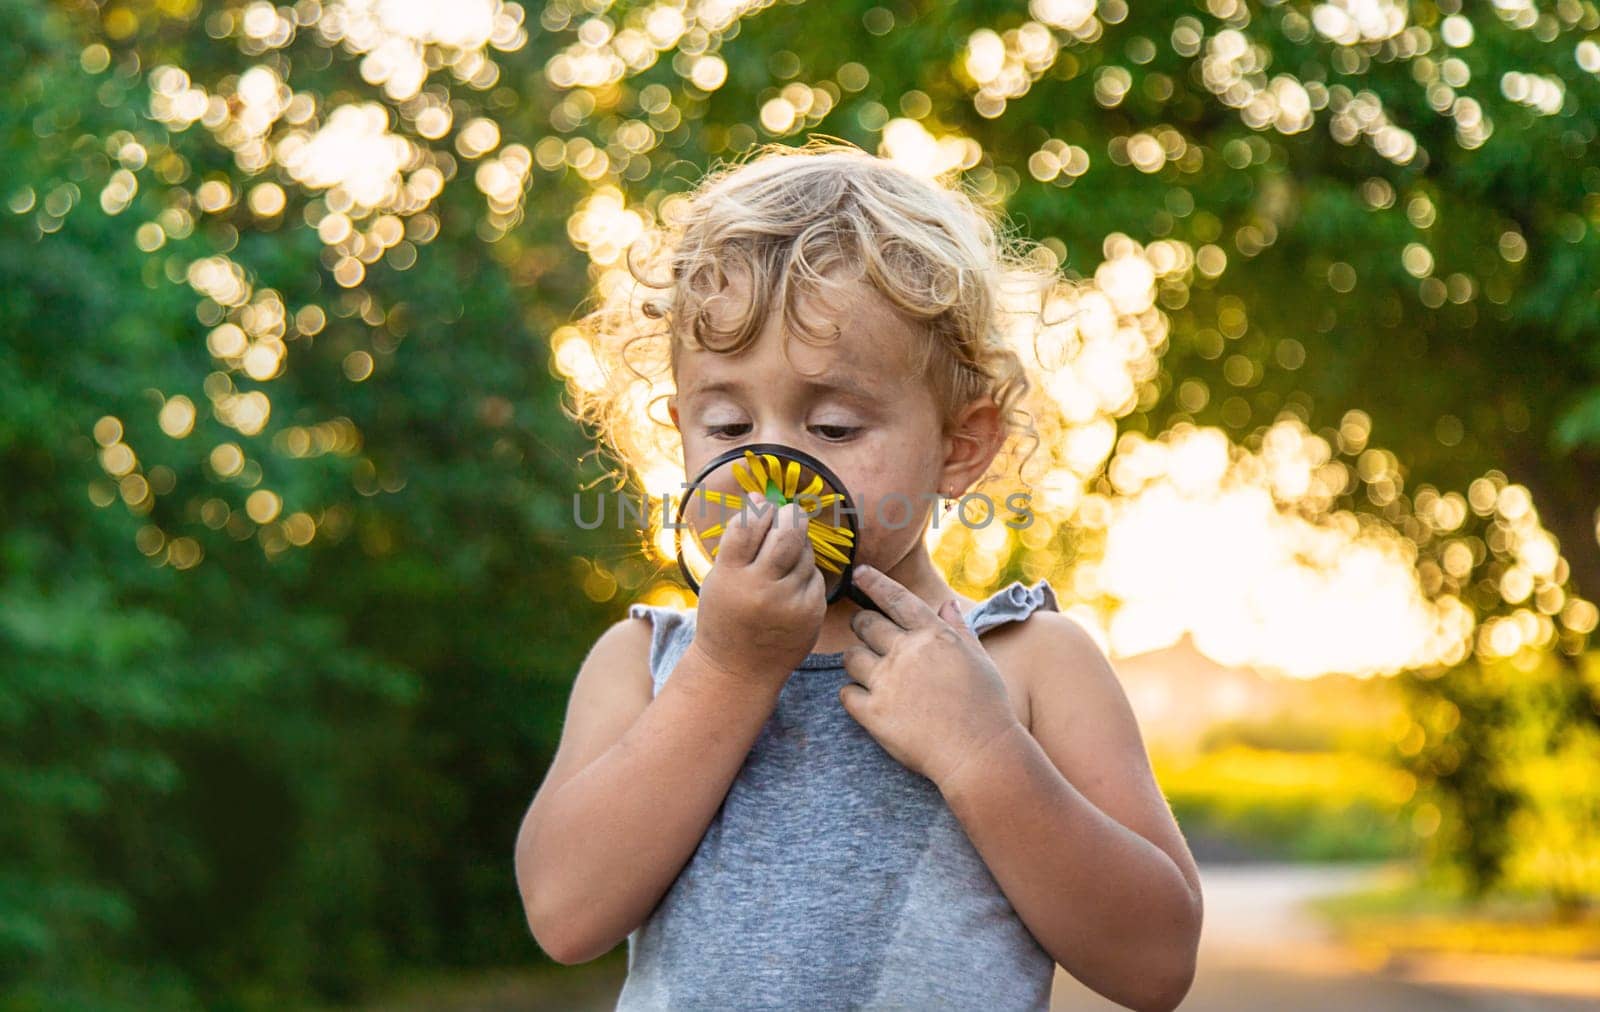 A child looks at a flower with a magnifying glass. Selective focus. Kid.